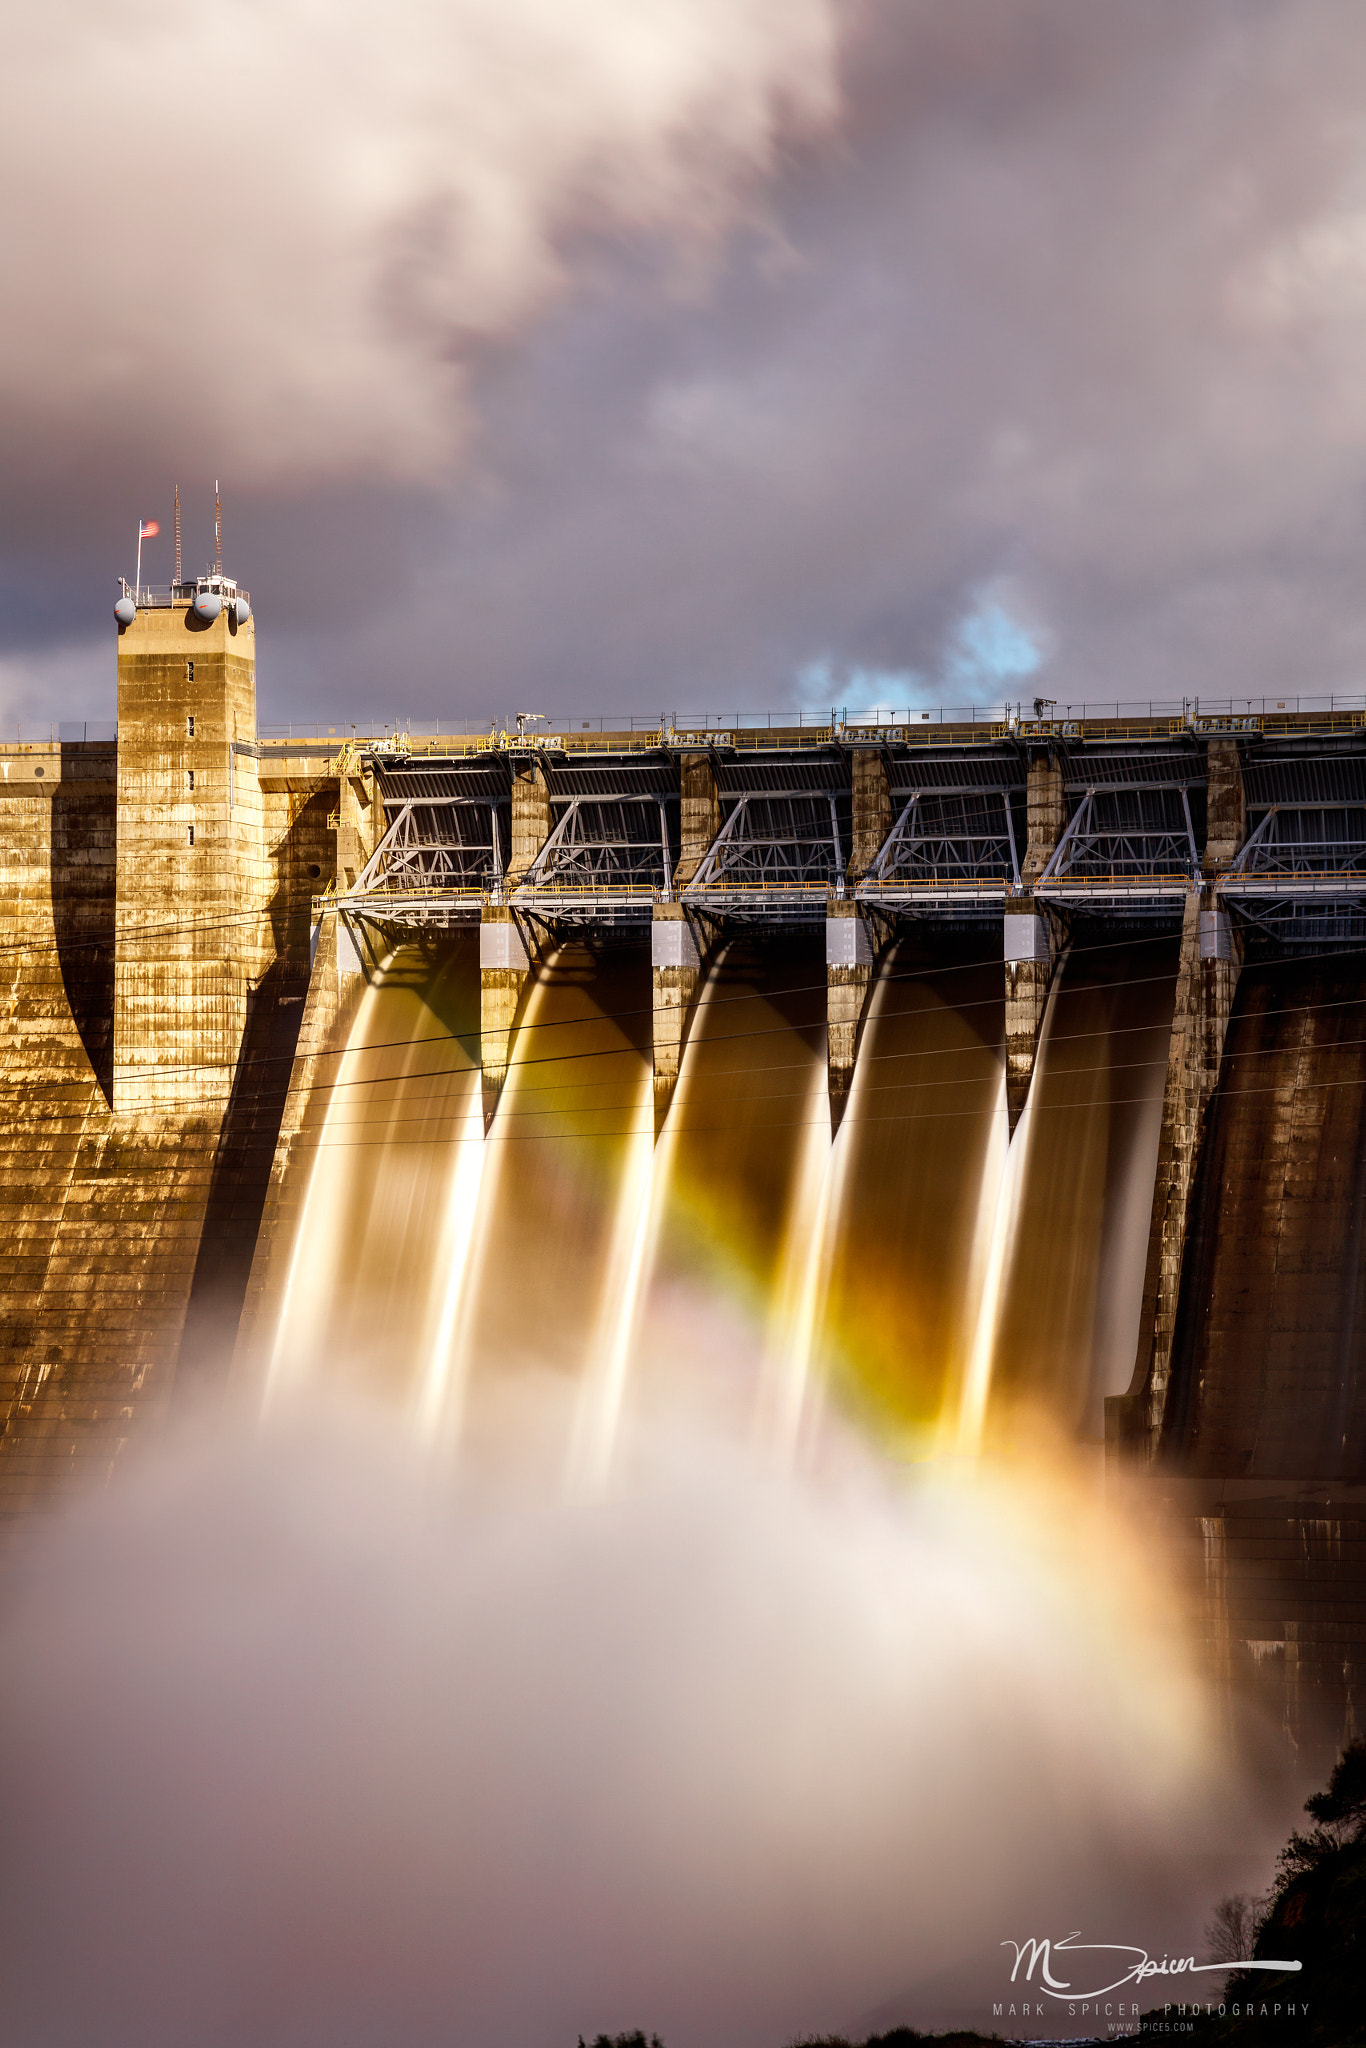 Canon EOS 5DS R + Sigma 24-105mm f/4 DG OS HSM | A sample photo. Folsom dam after storm photography